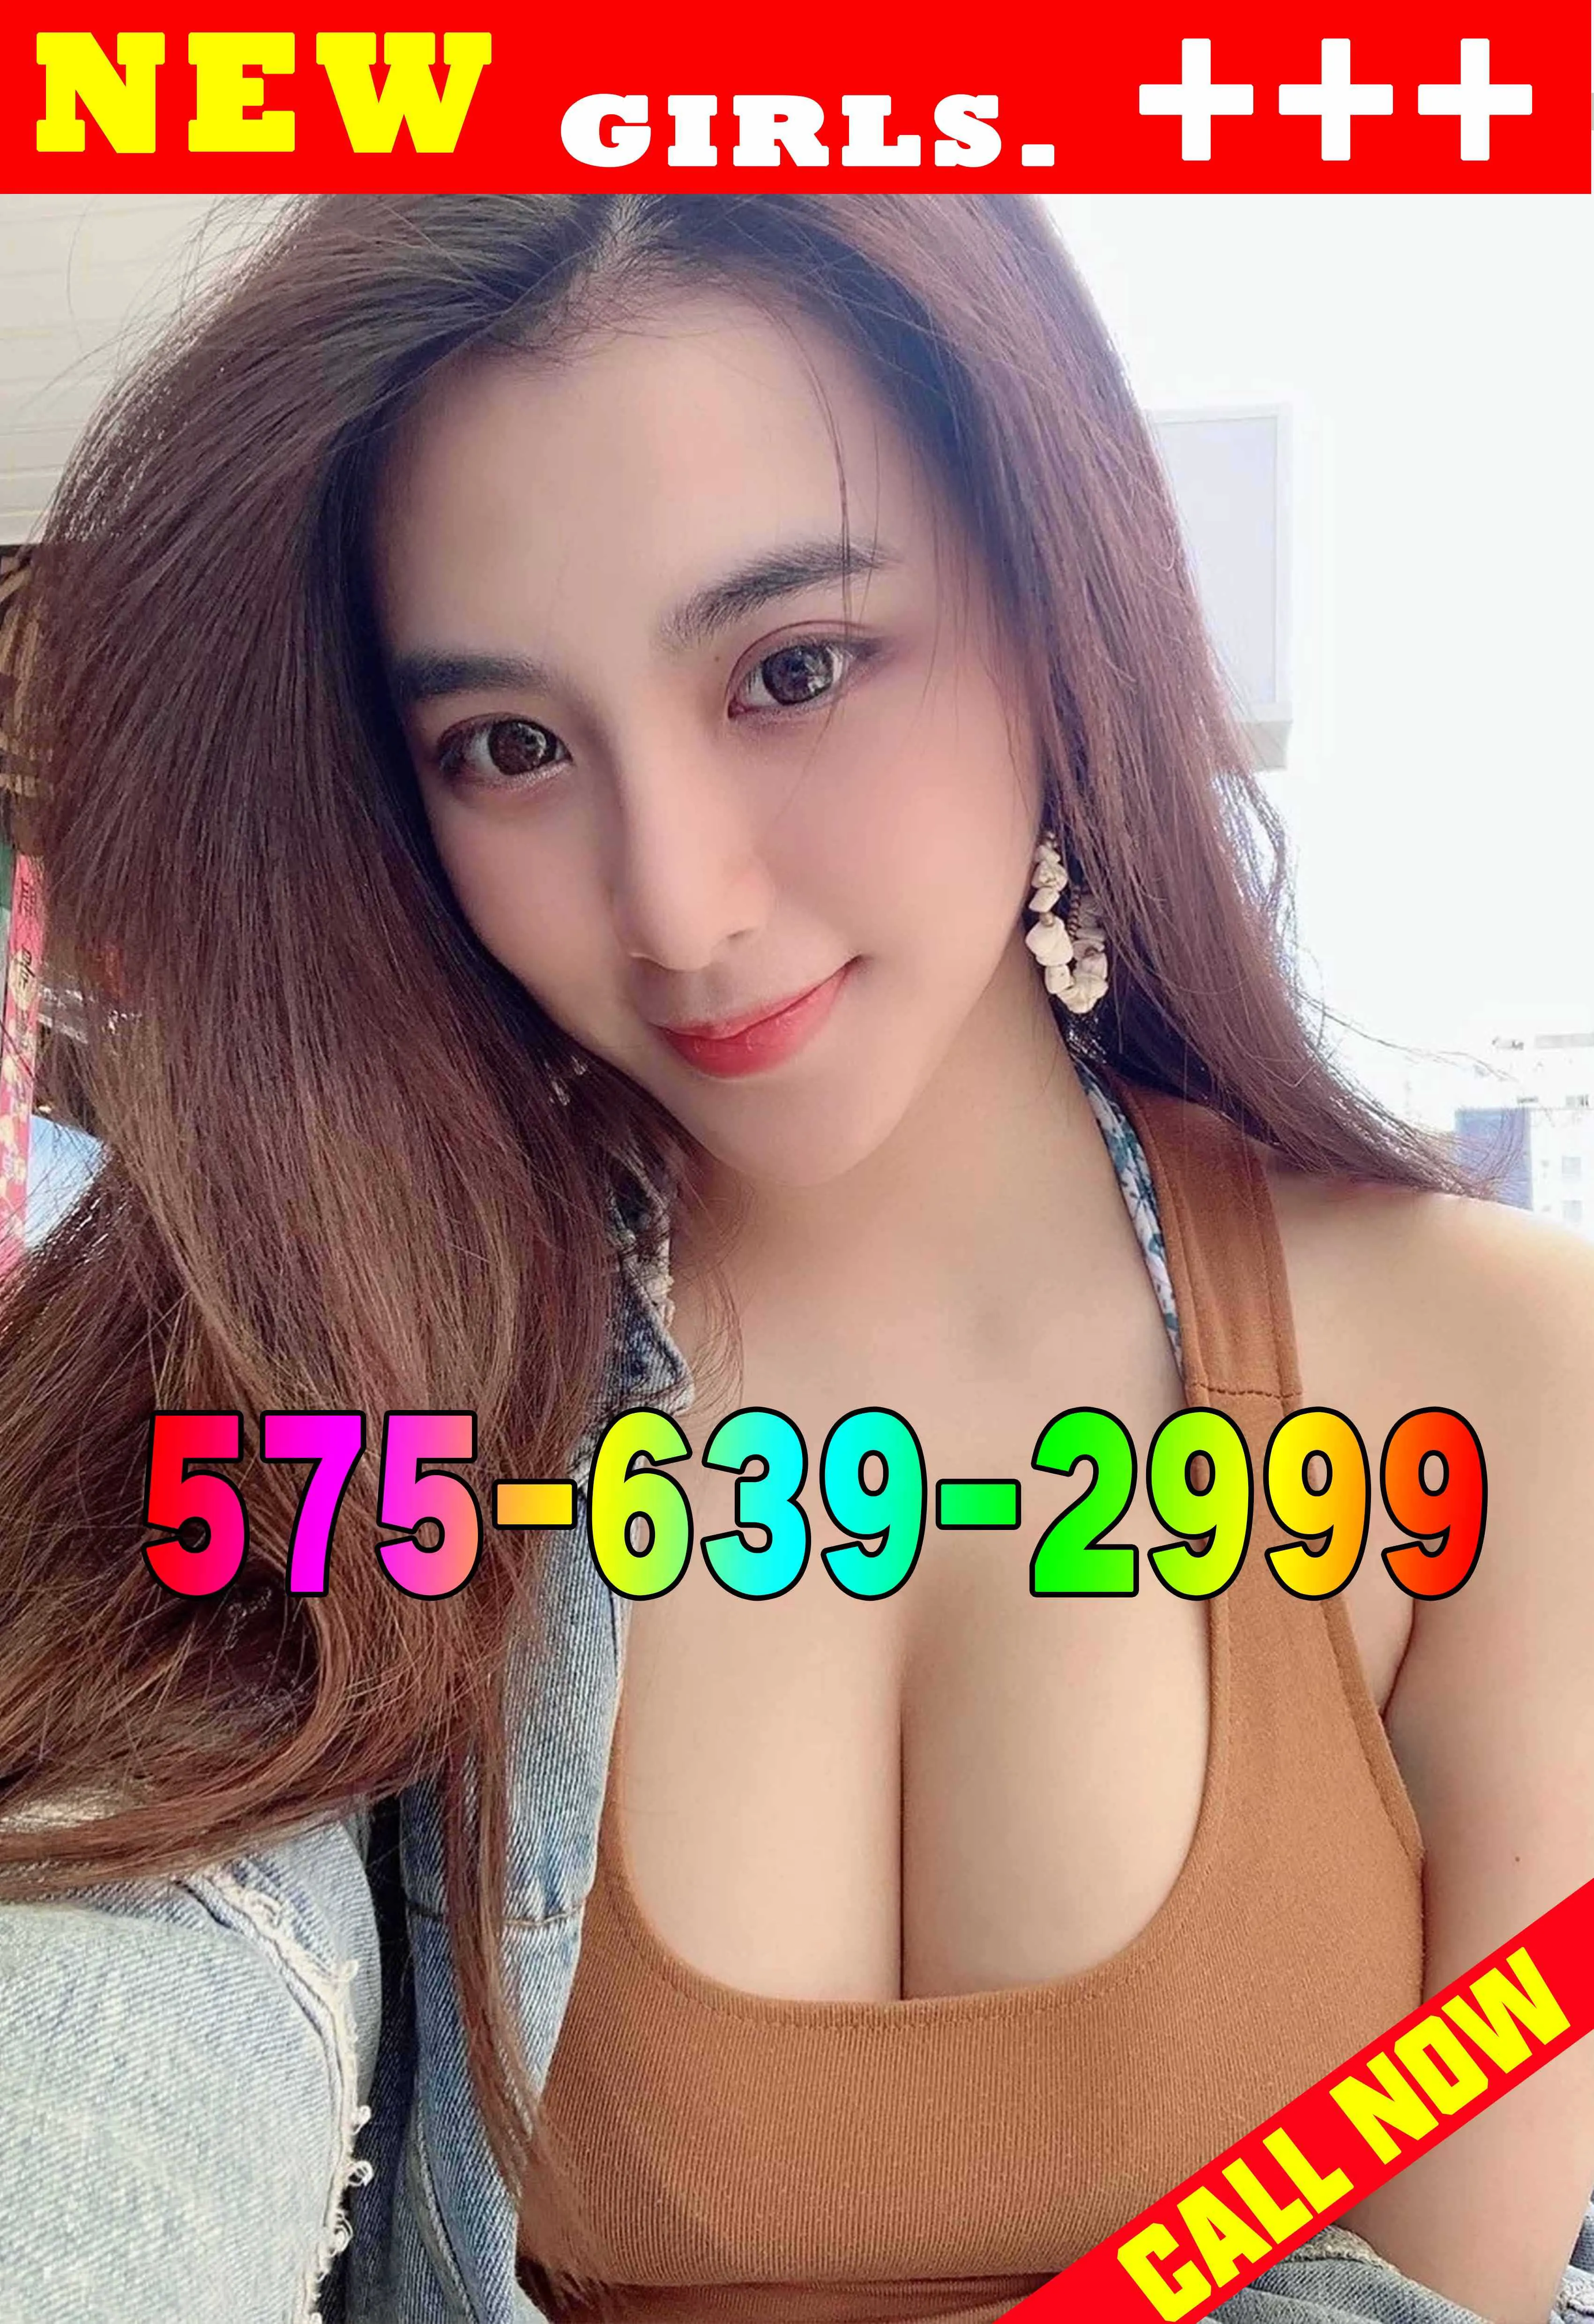 Reviews about escort with phone number 5756392999